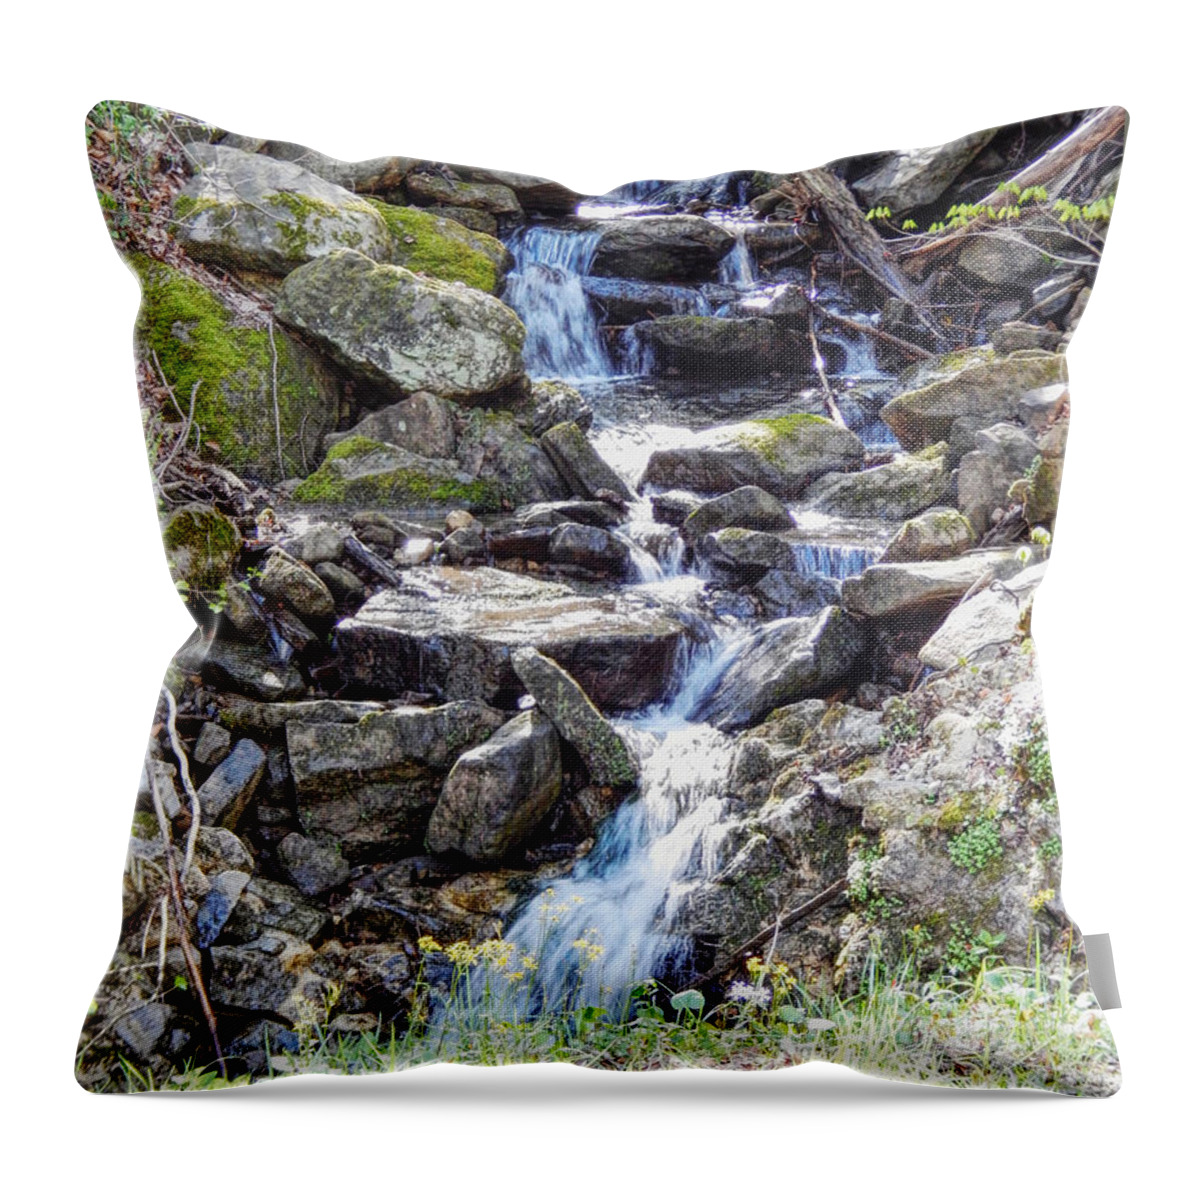 Photograph Throw Pillow featuring the photograph Roadside Waterfall by Phil Perkins